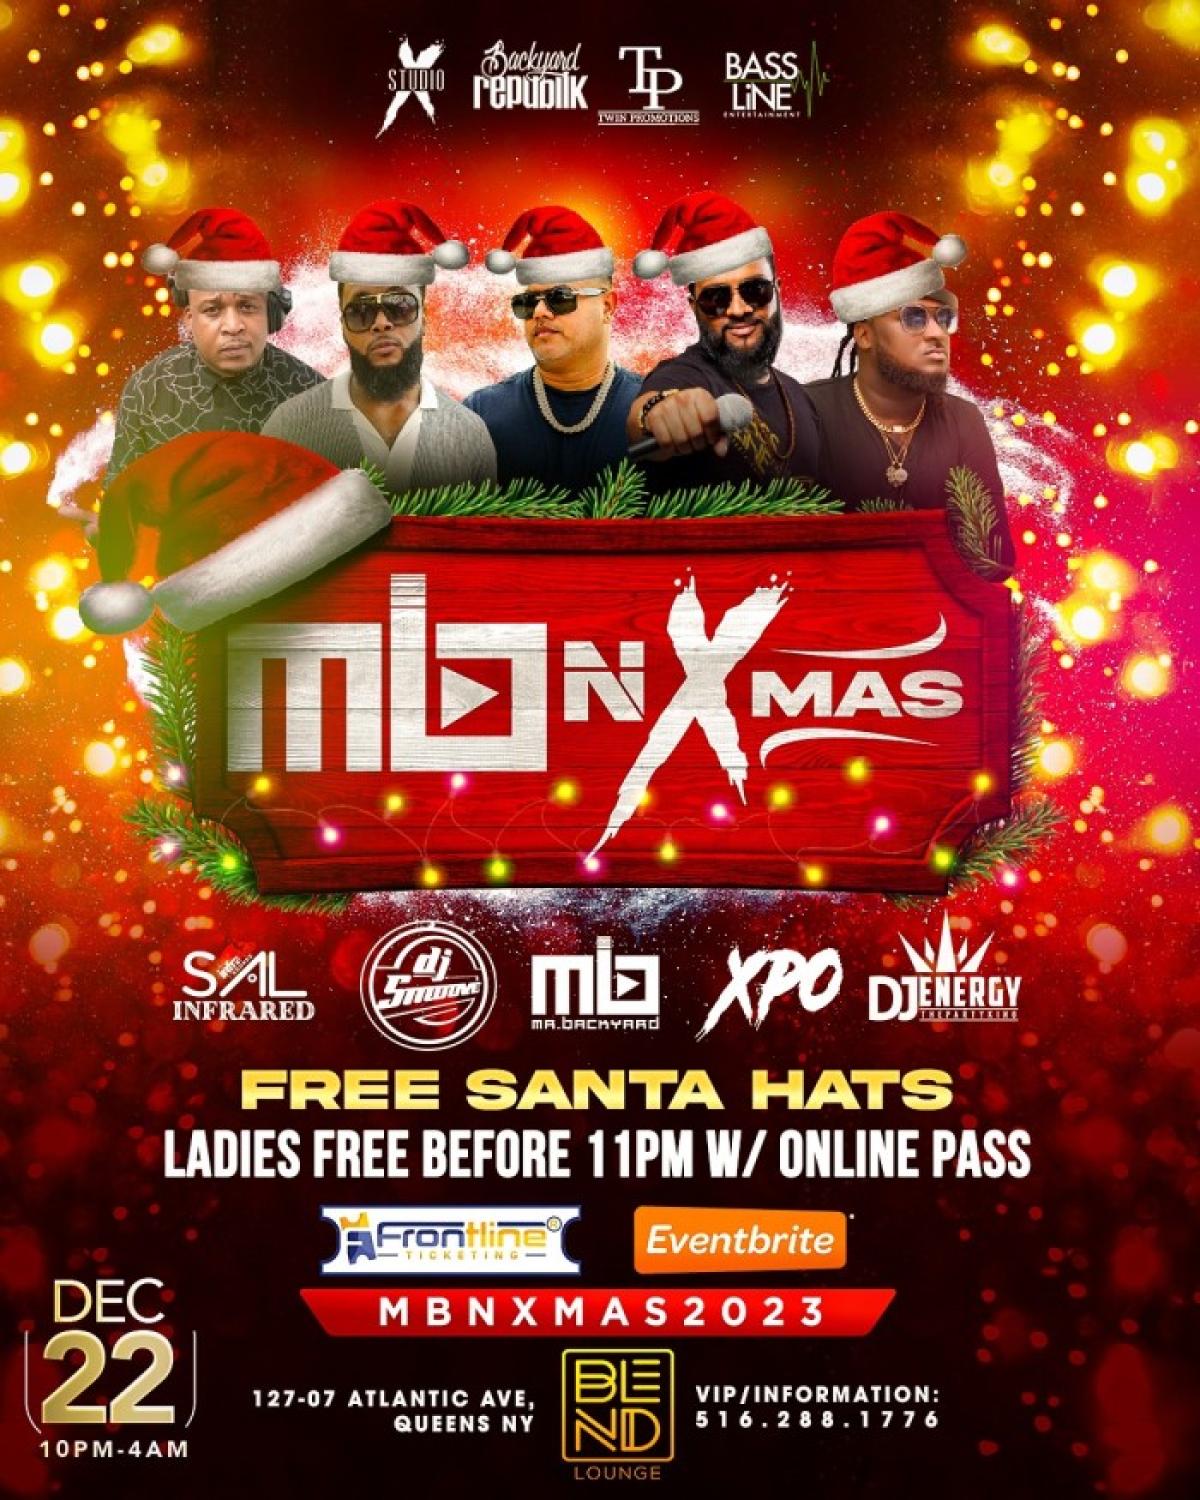 MBnXmas flyer or graphic.